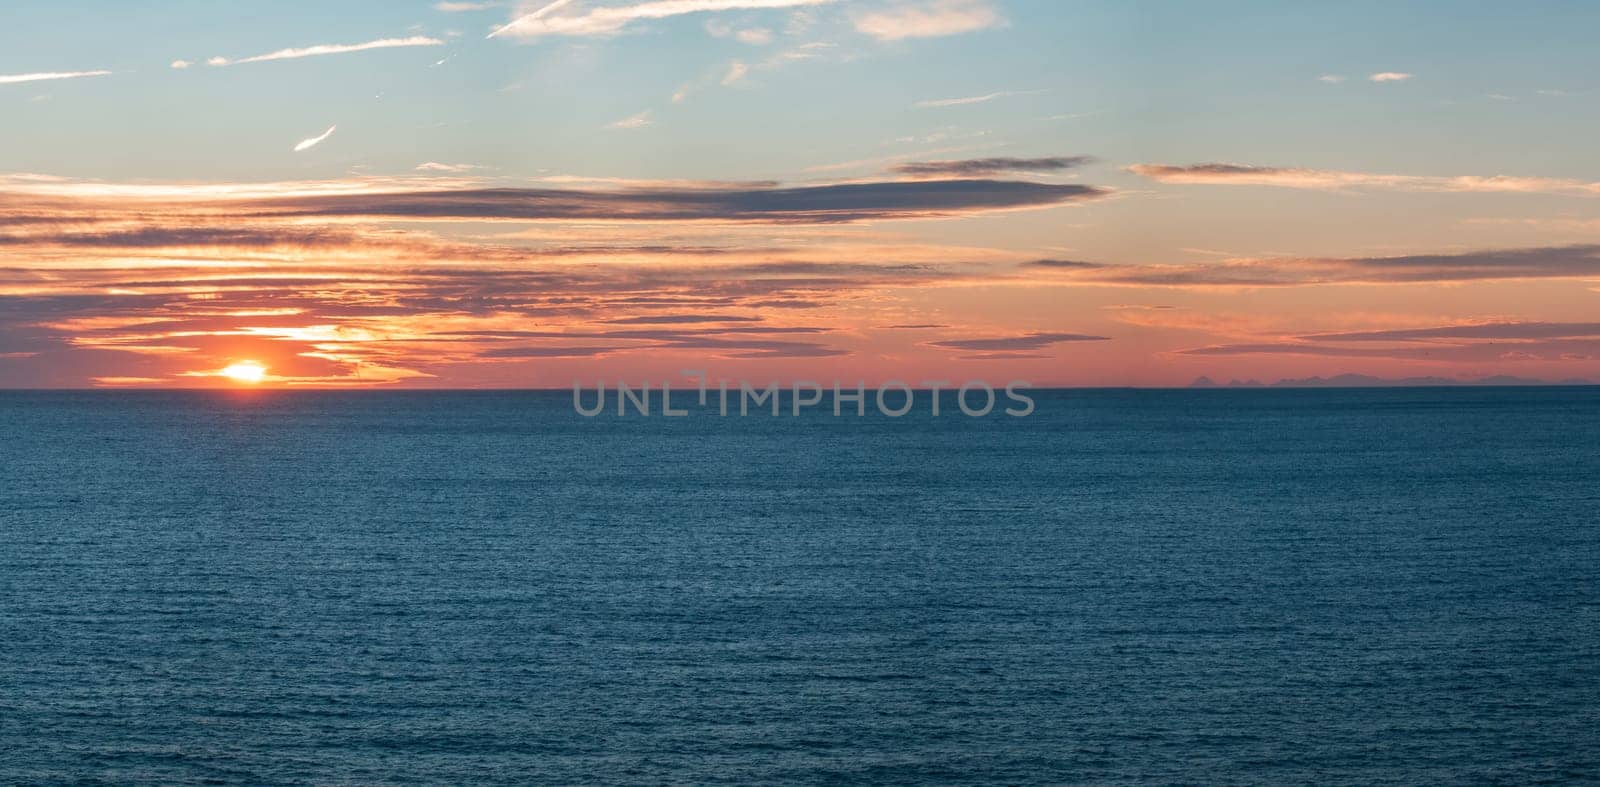 Tranquil Ocean Sunset with Clouds and Distant Islands View by FerradalFCG